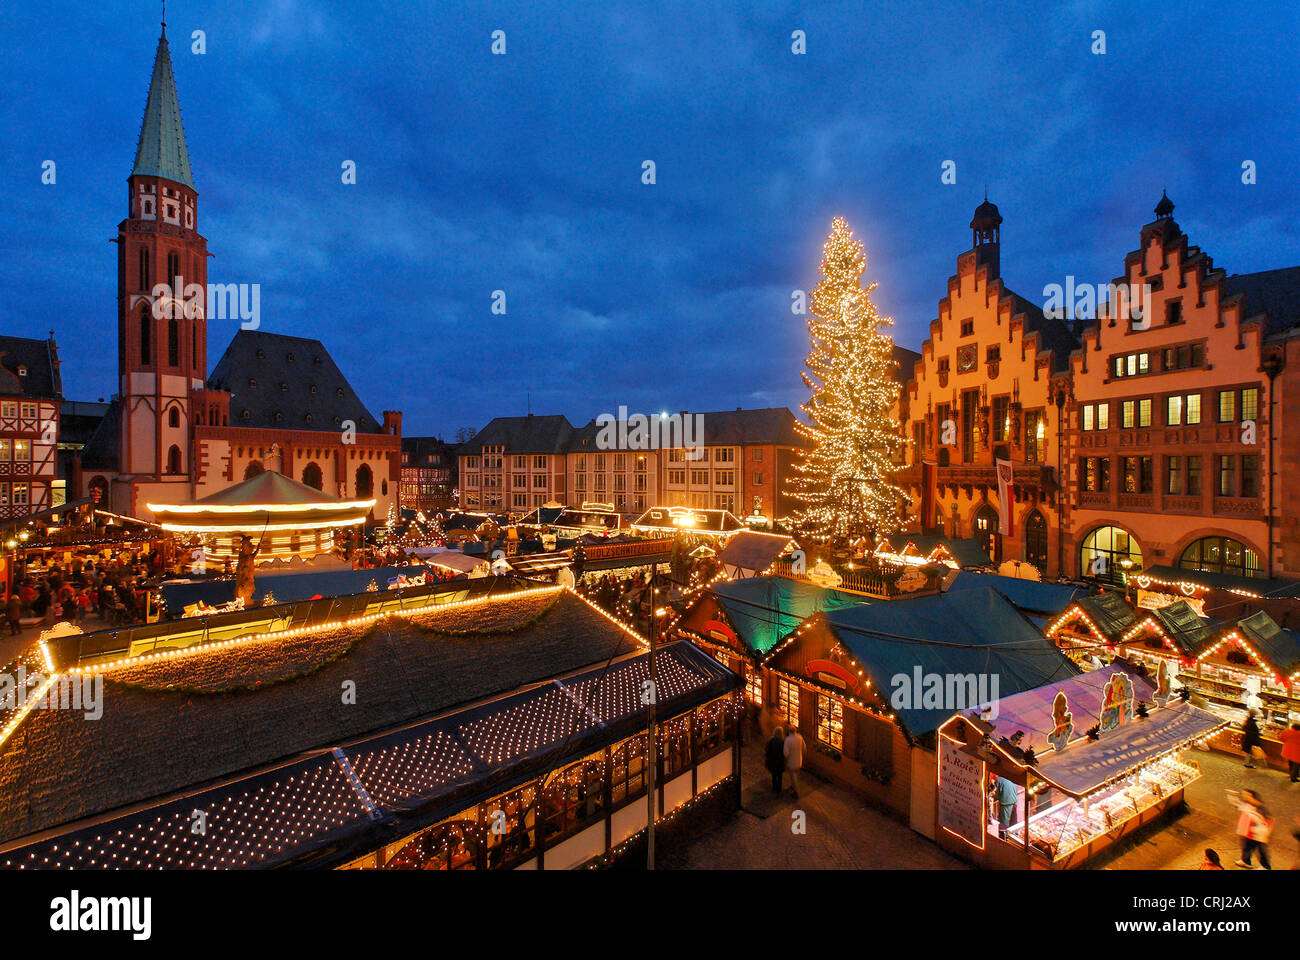 Christmas market in old town, Germany, Frankfurt am Main Stock Photo